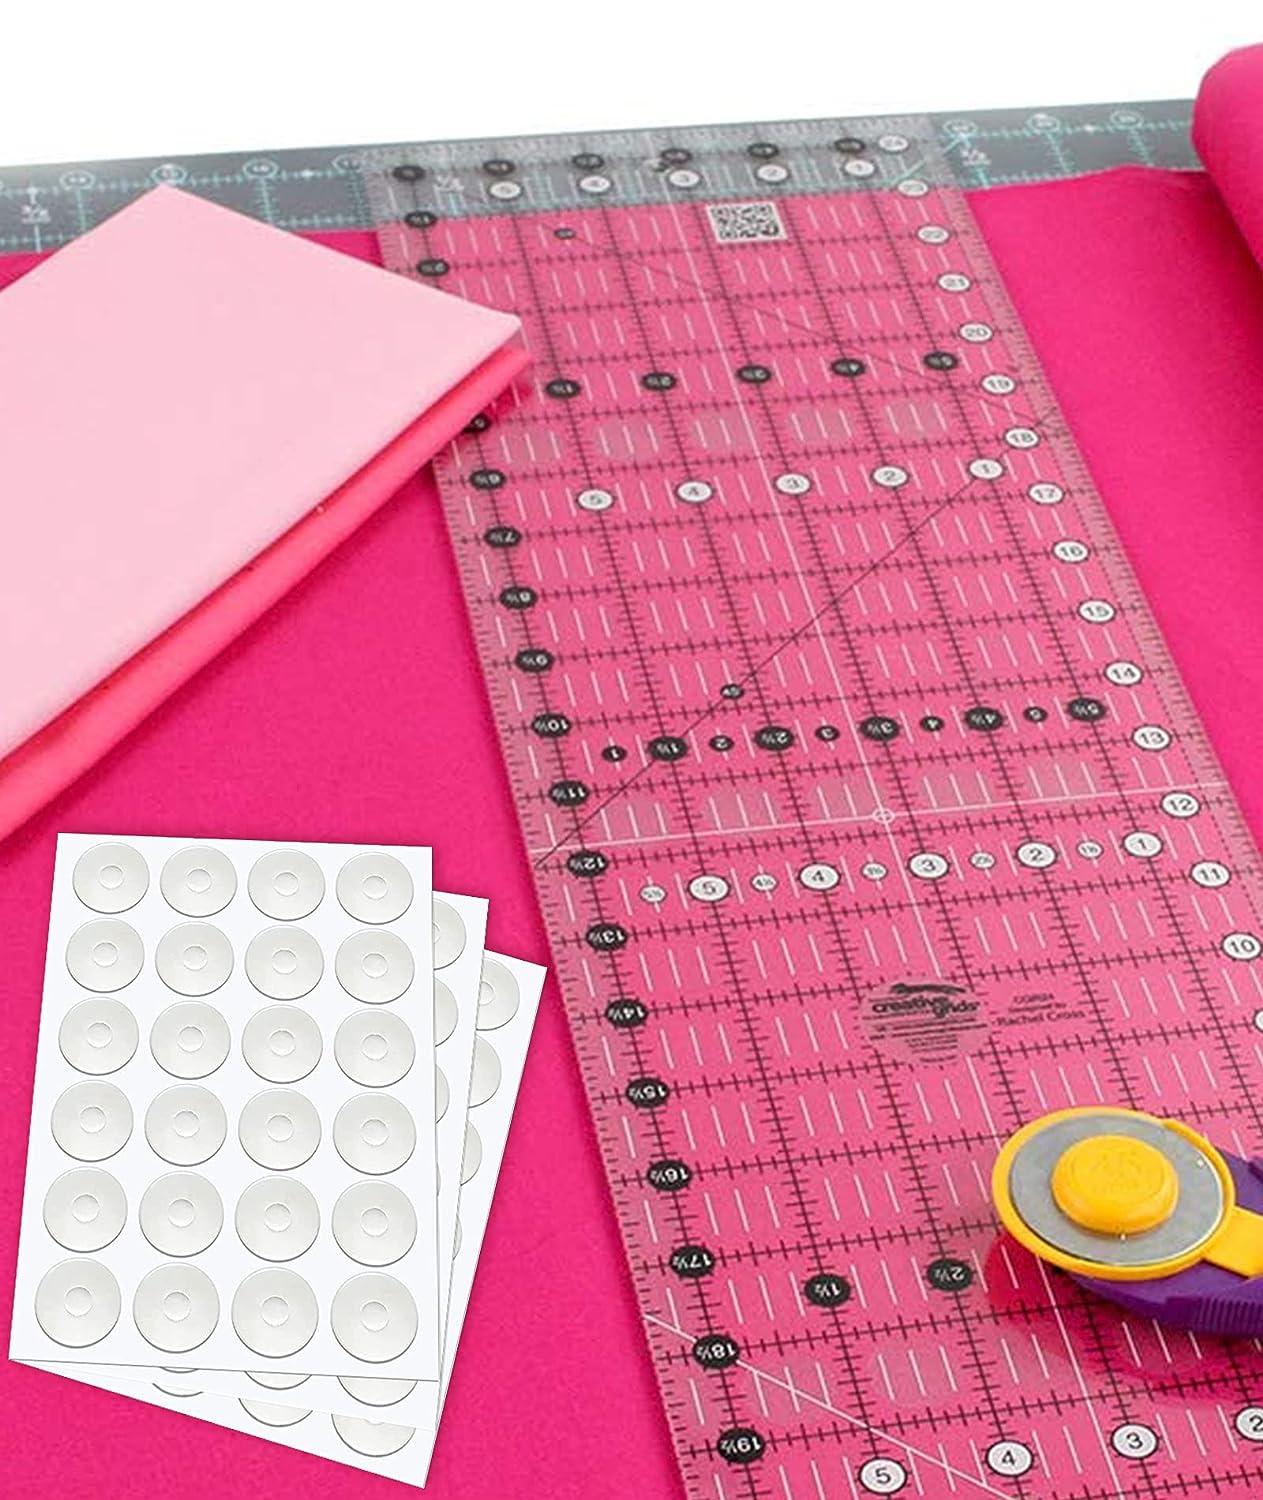 Silicone Round Quilt Template Non-Slip Adhesive Ring Ruler Ruler